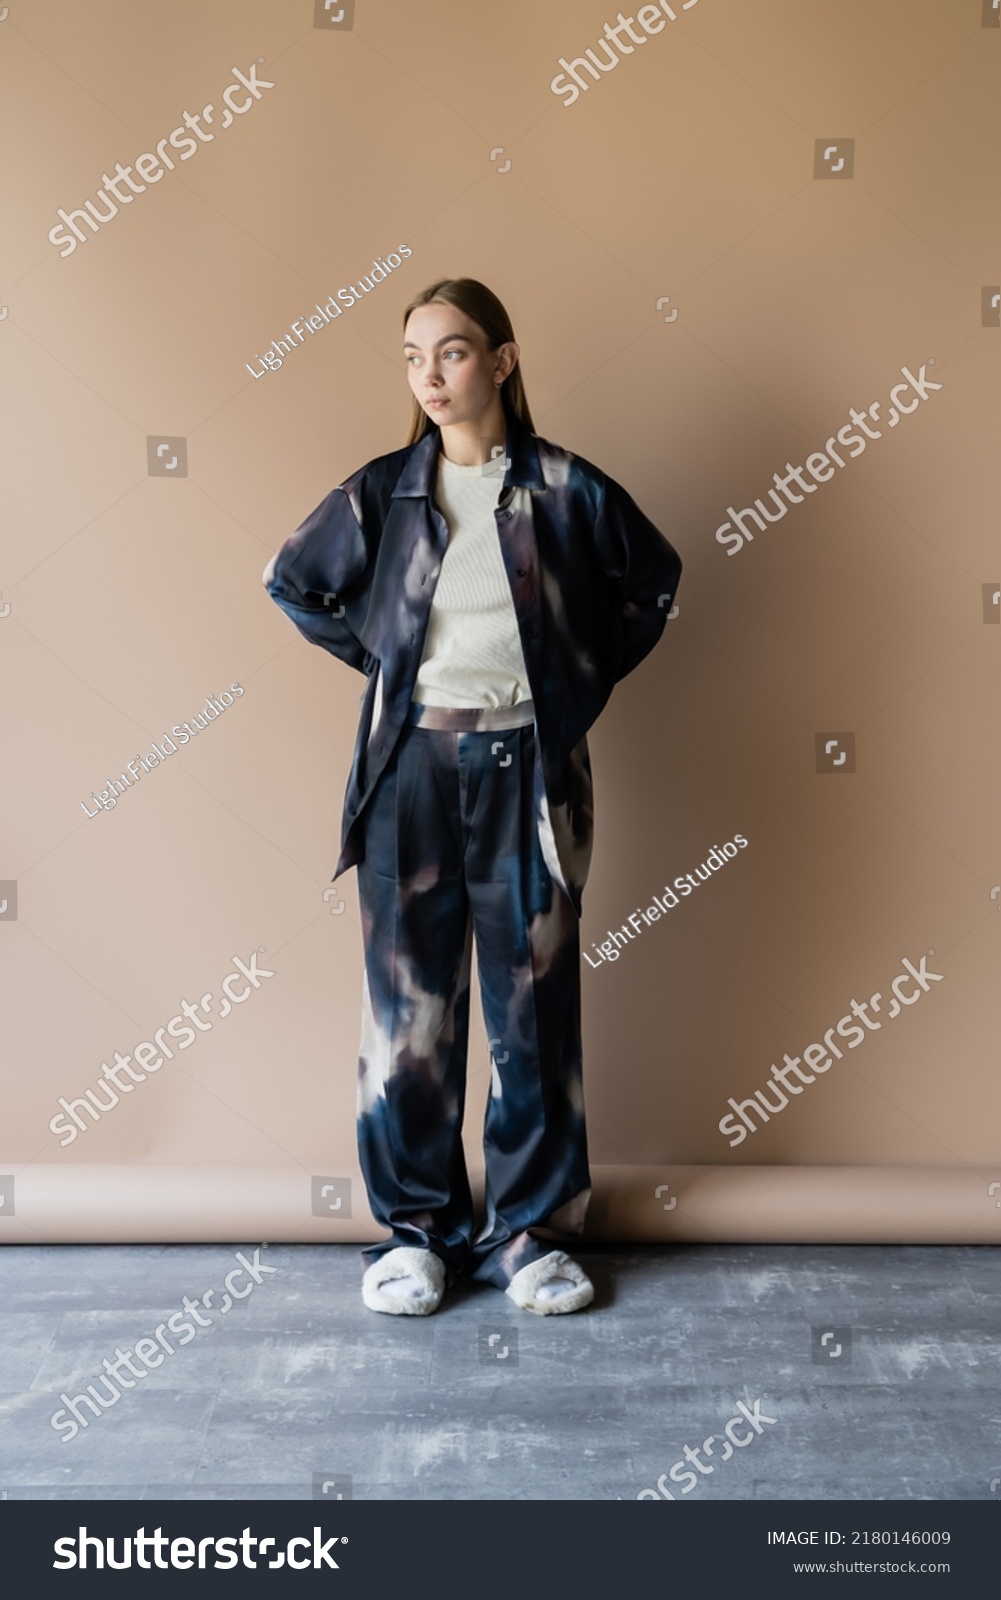 full length of woman in oversize clothes and soft slippers posing with hands behind back on beige background #2180146009